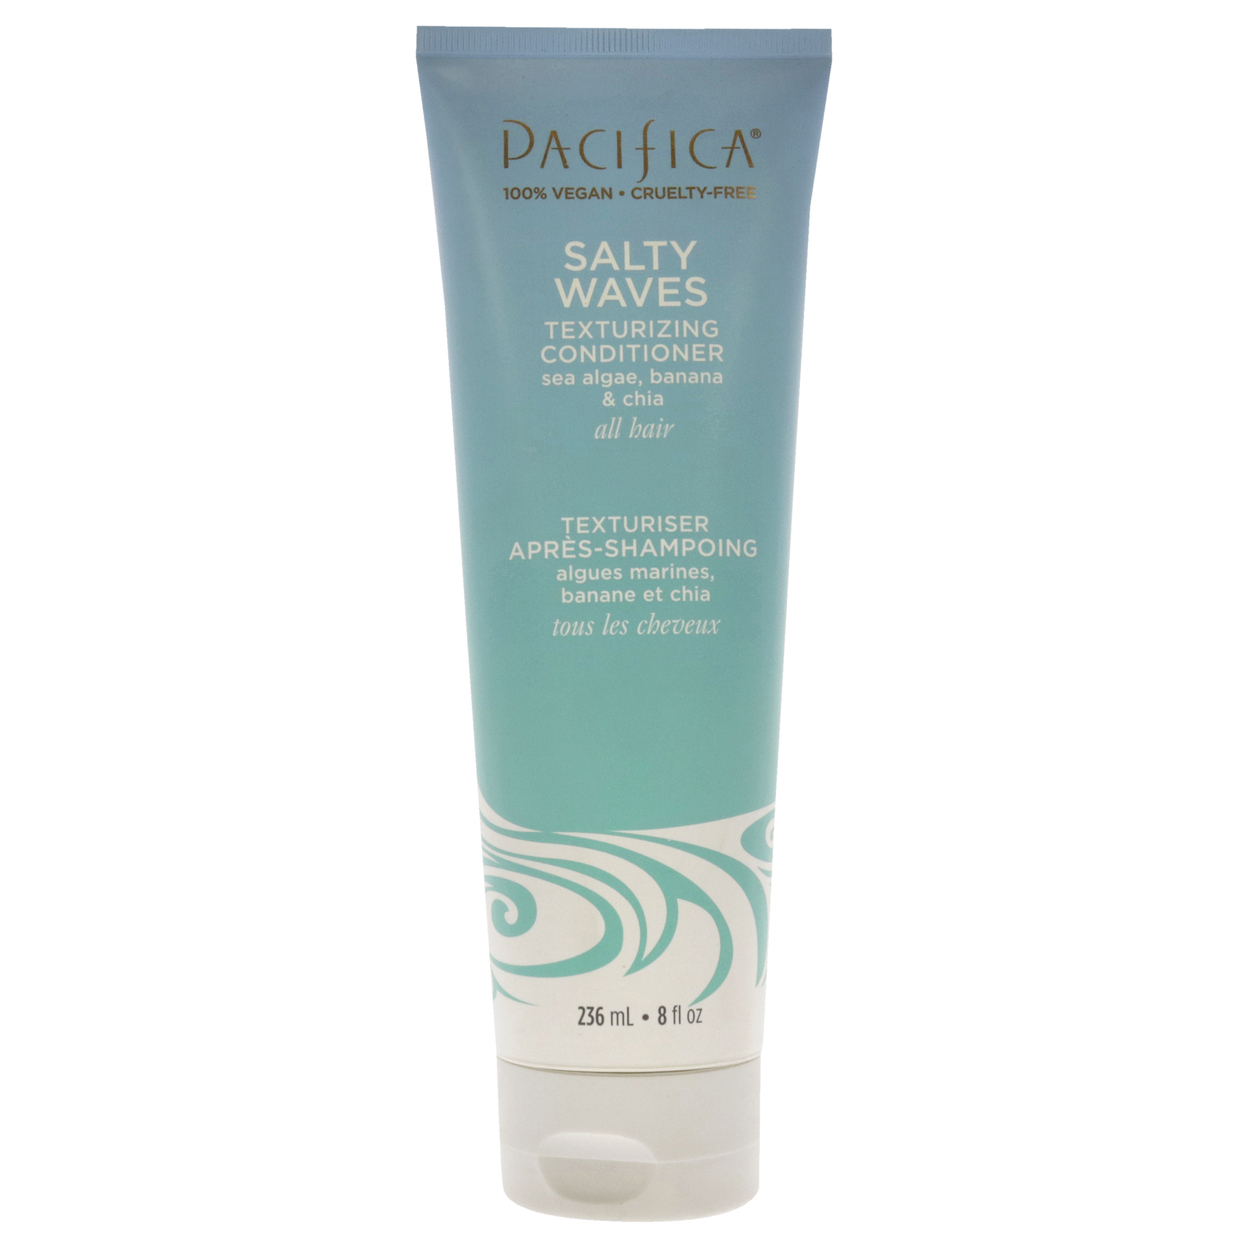 Pacifica Salty Waves Texturizing Conditioner 8 Oz